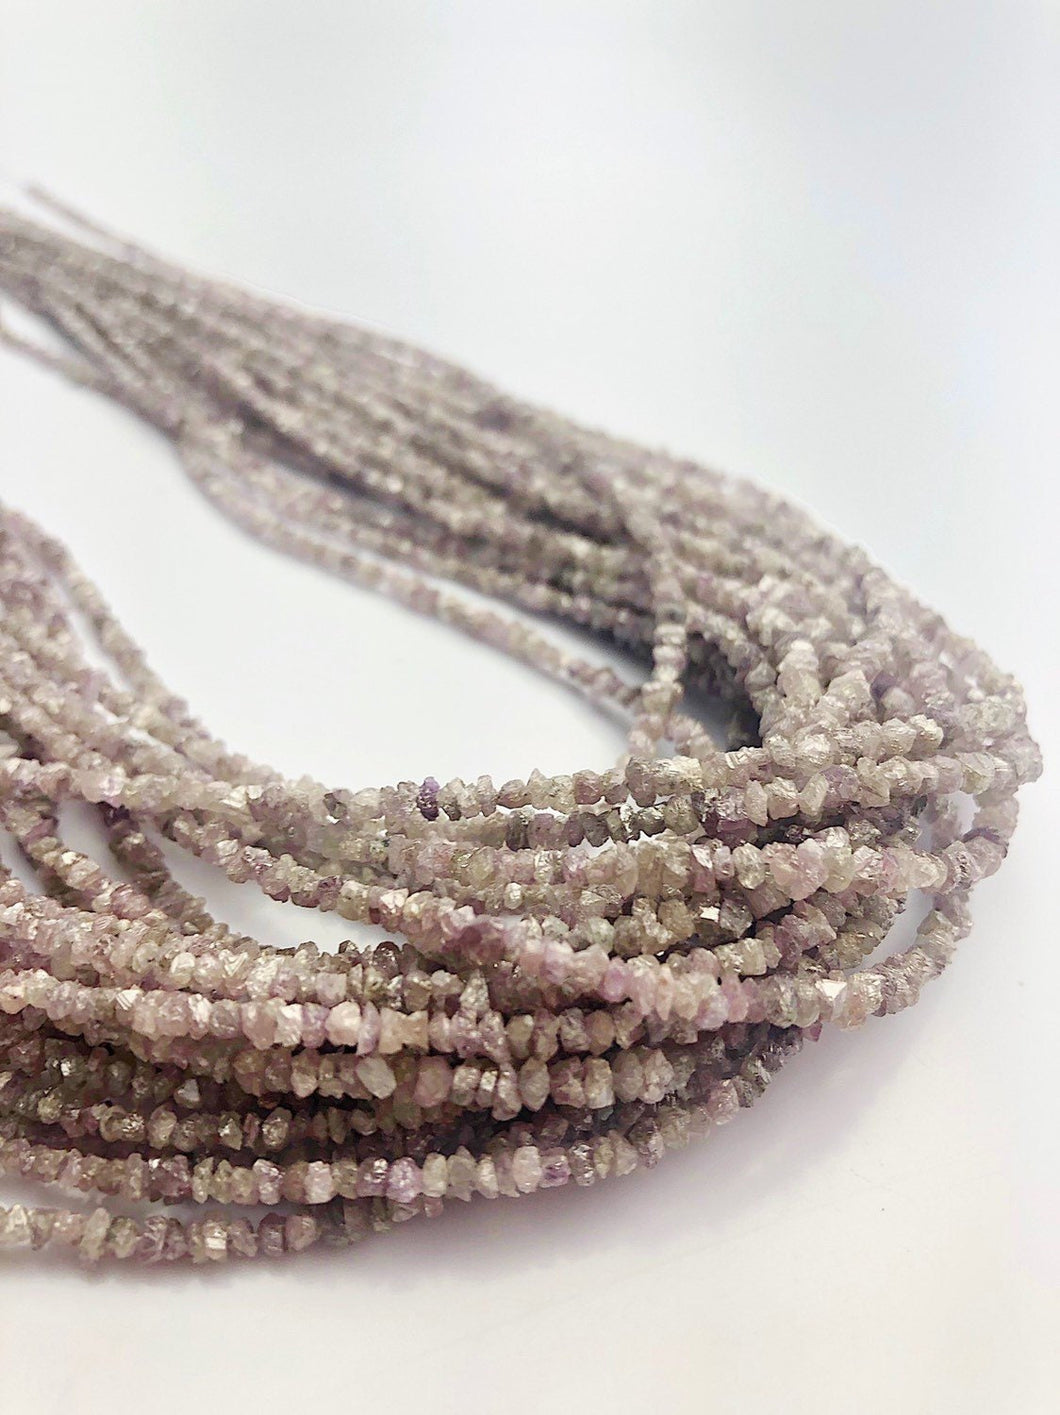 Pink Lavender Diamond Chip Gemstone Beads, All Natural Color, Full Strand, 15